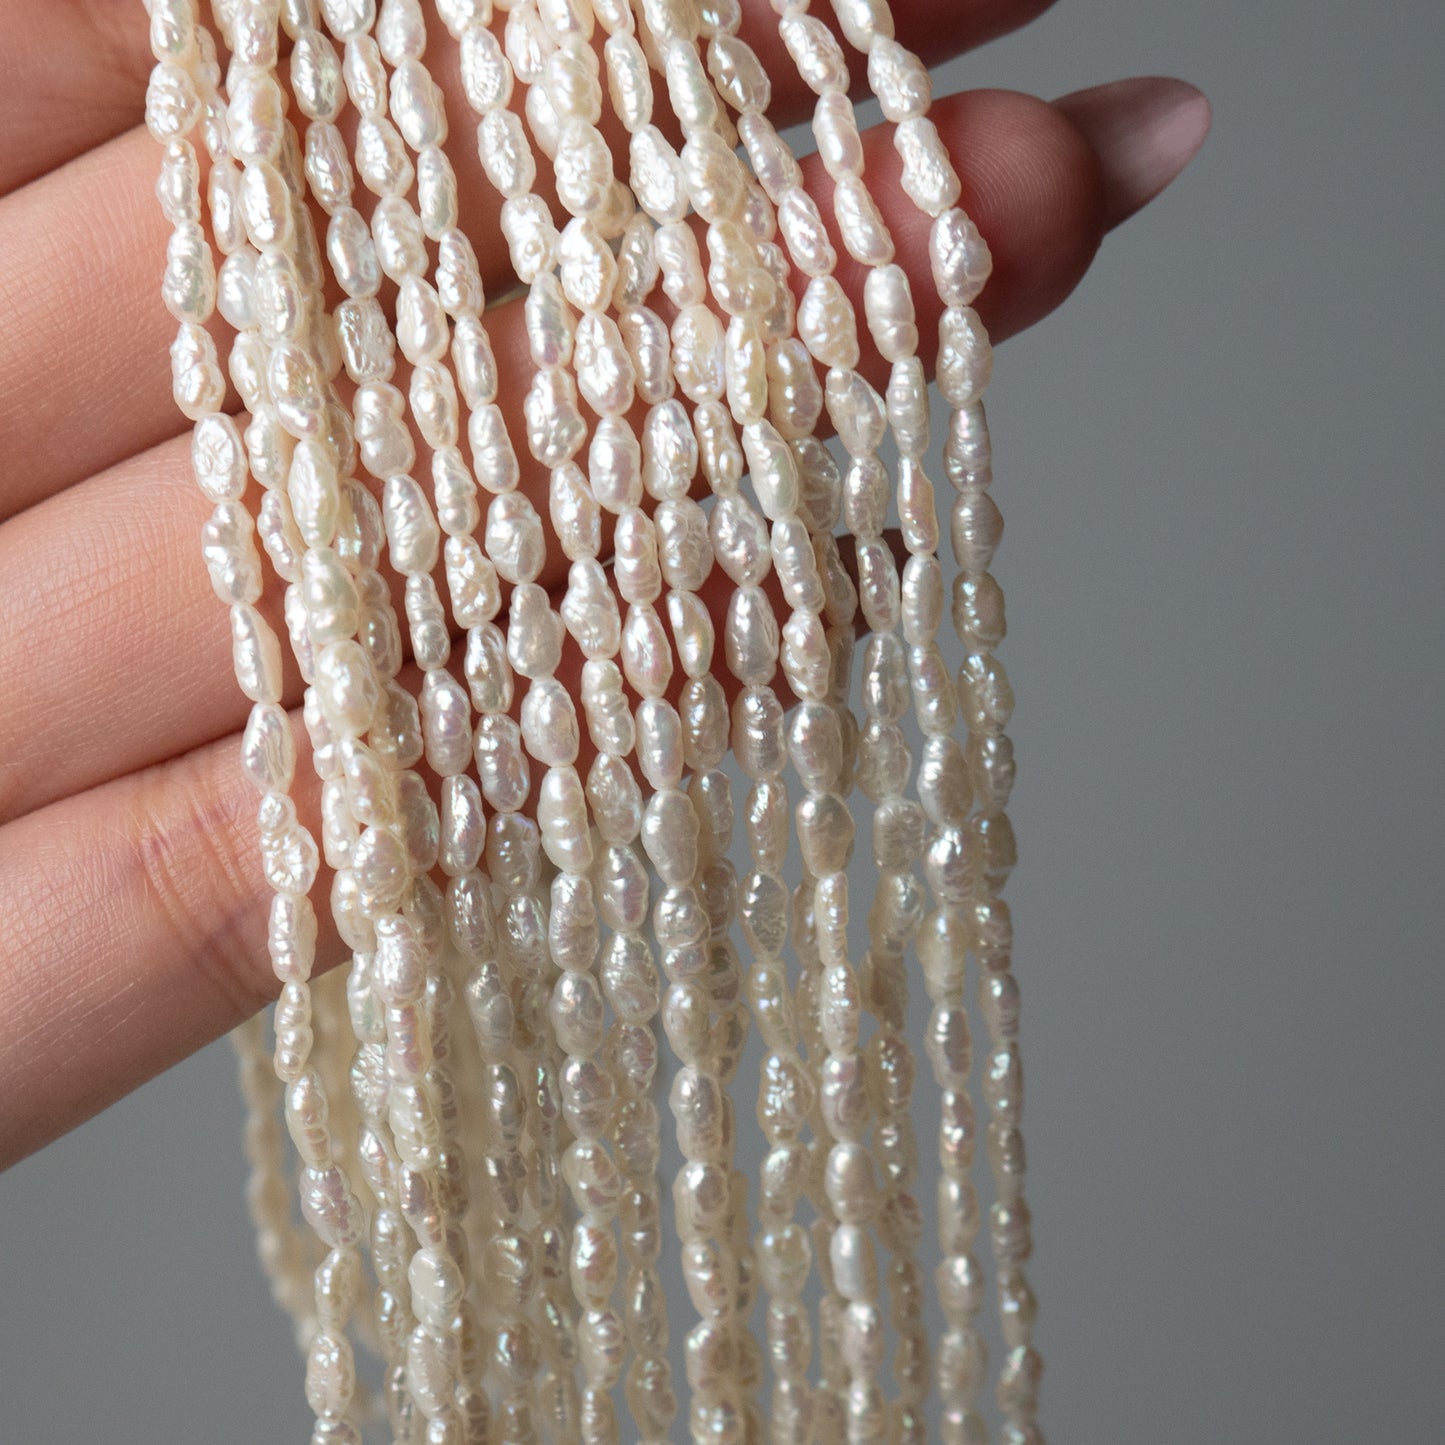 [Japanese product] Freshwater Pearl Natural White Poppy Seed Beads 1 Strand